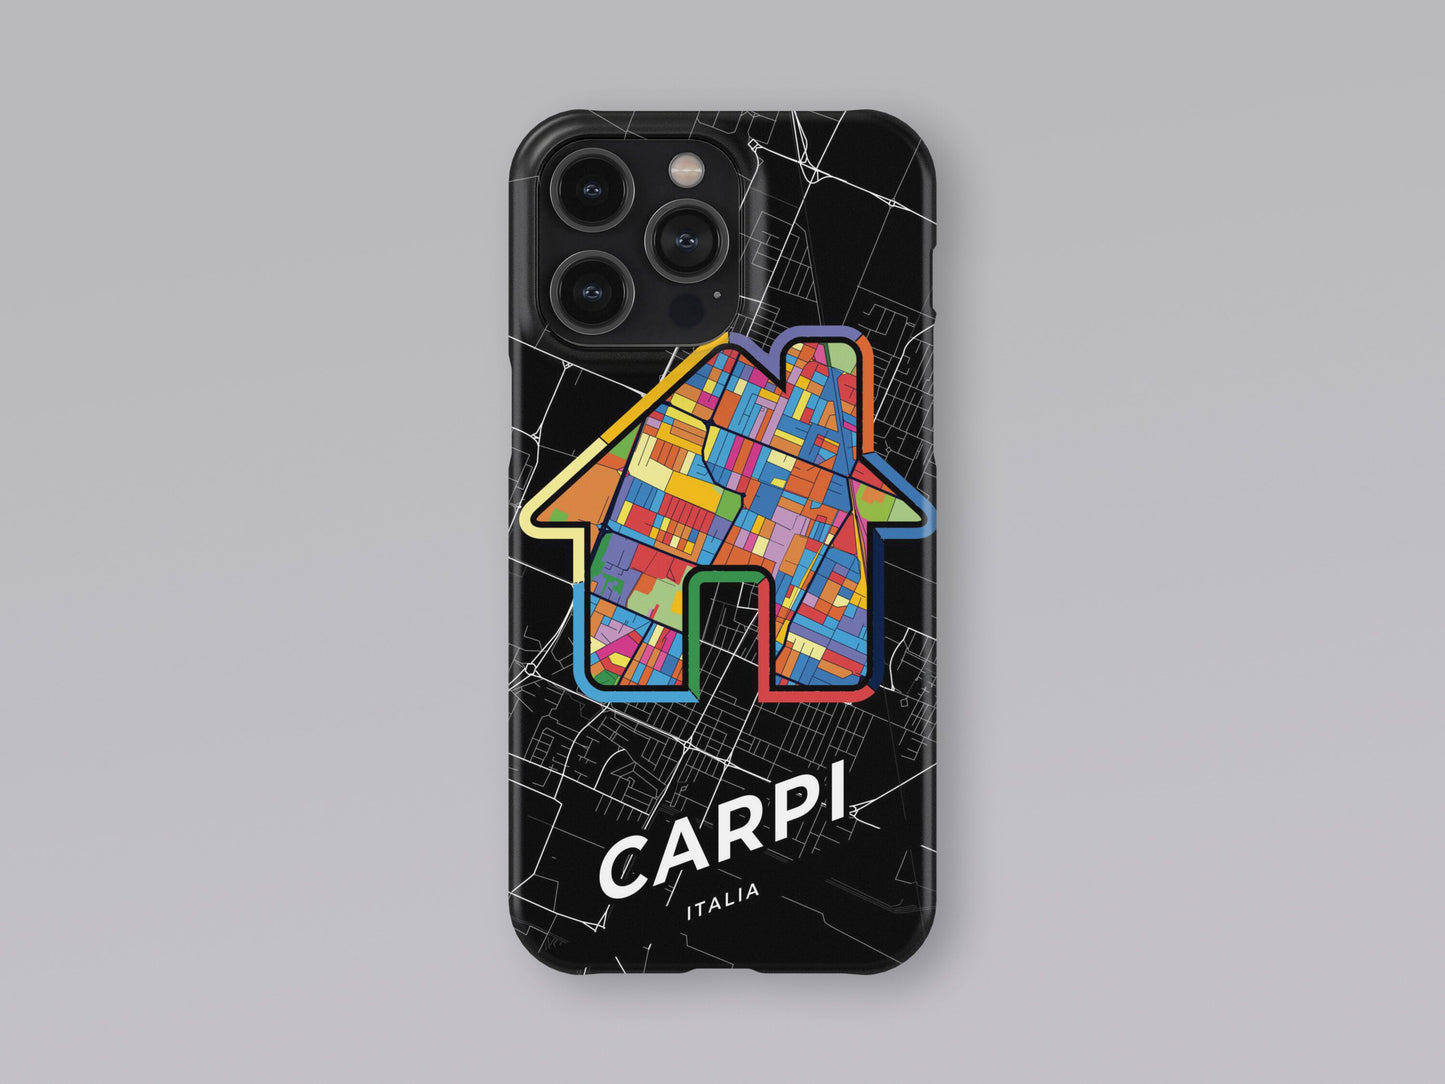 Carpi Italy slim phone case with colorful icon. Birthday, wedding or housewarming gift. Couple match cases. 3